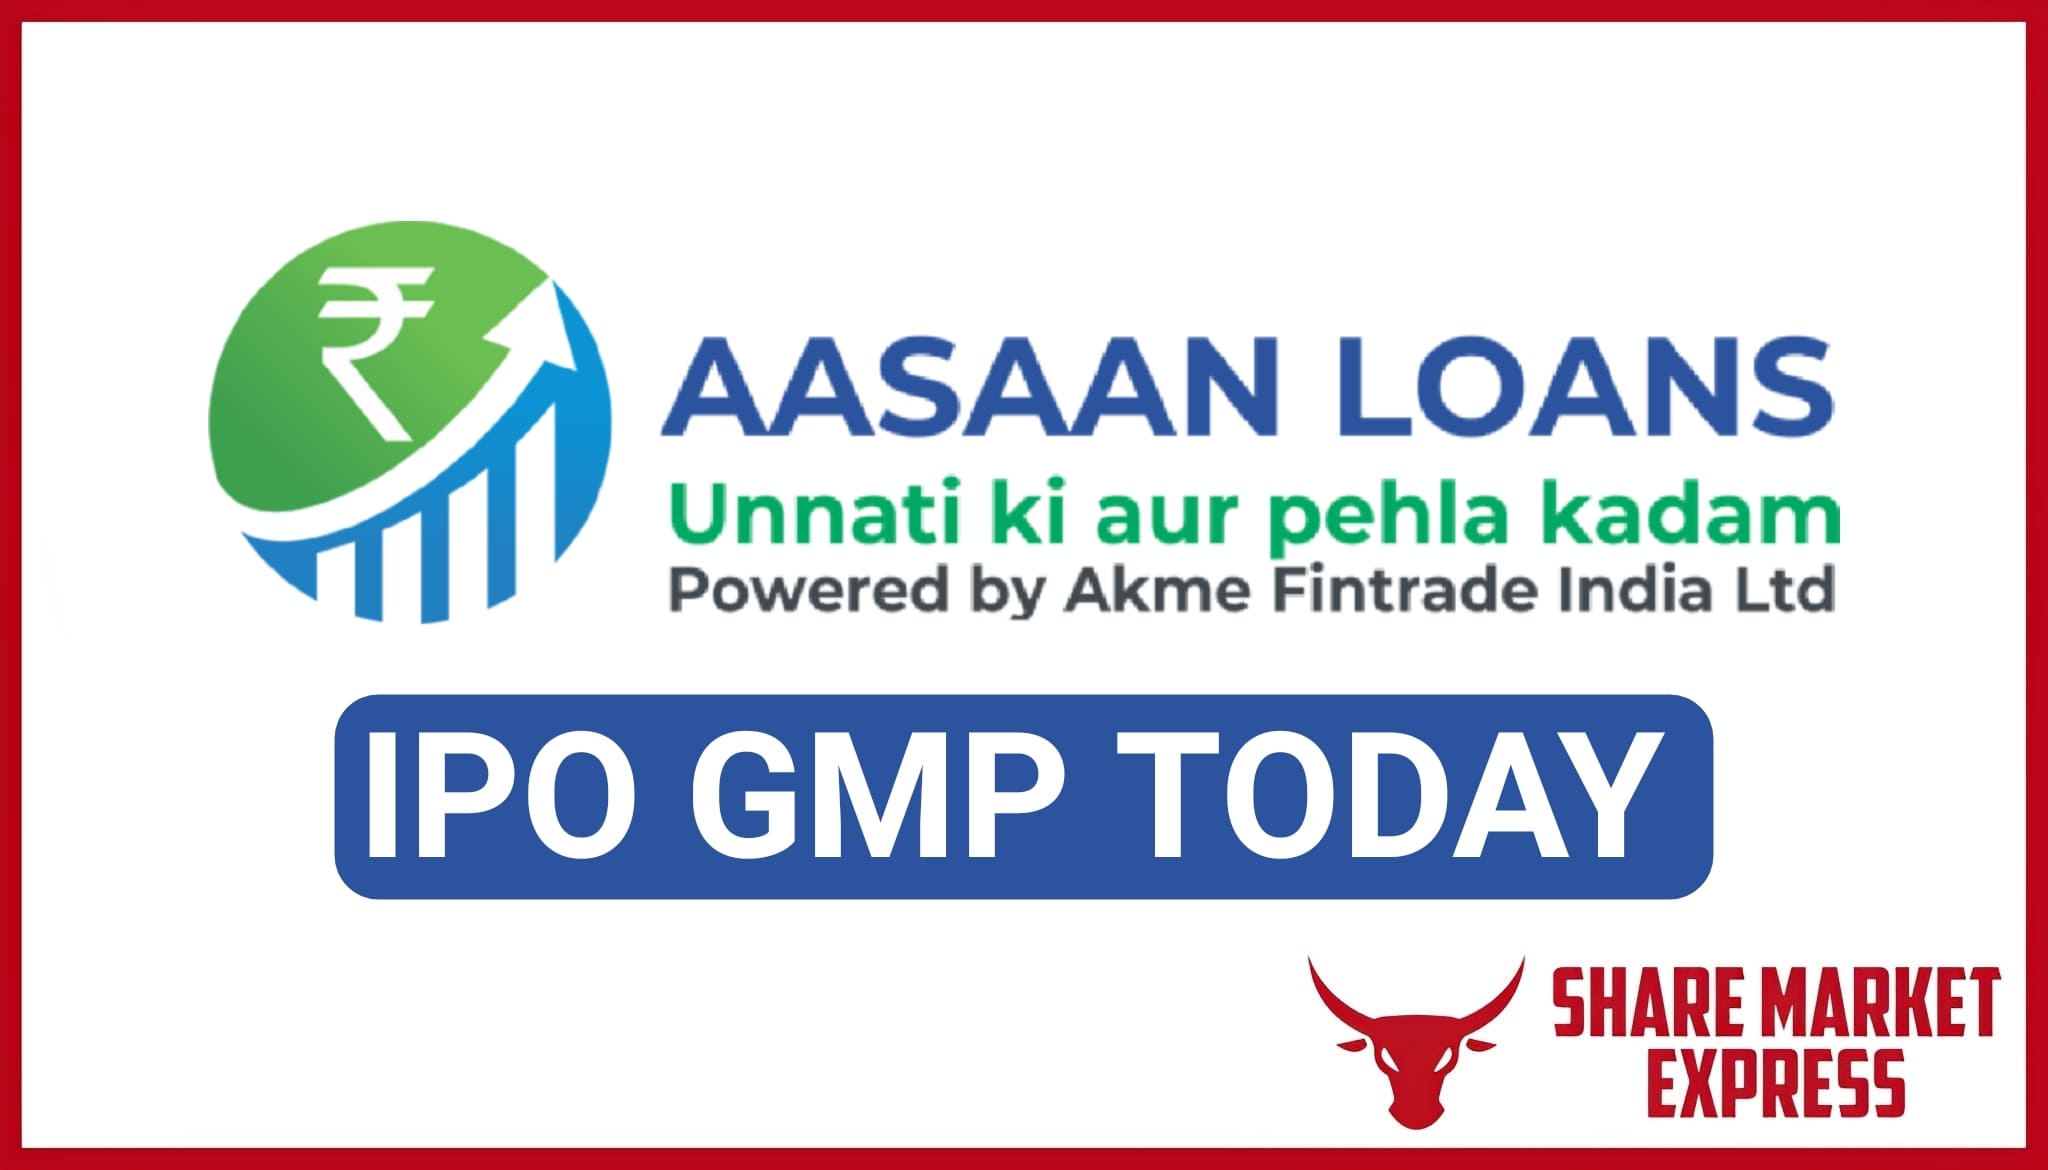 Akme Fintrade IPO GMP Today , Aasaan Loans IPO GMP Today